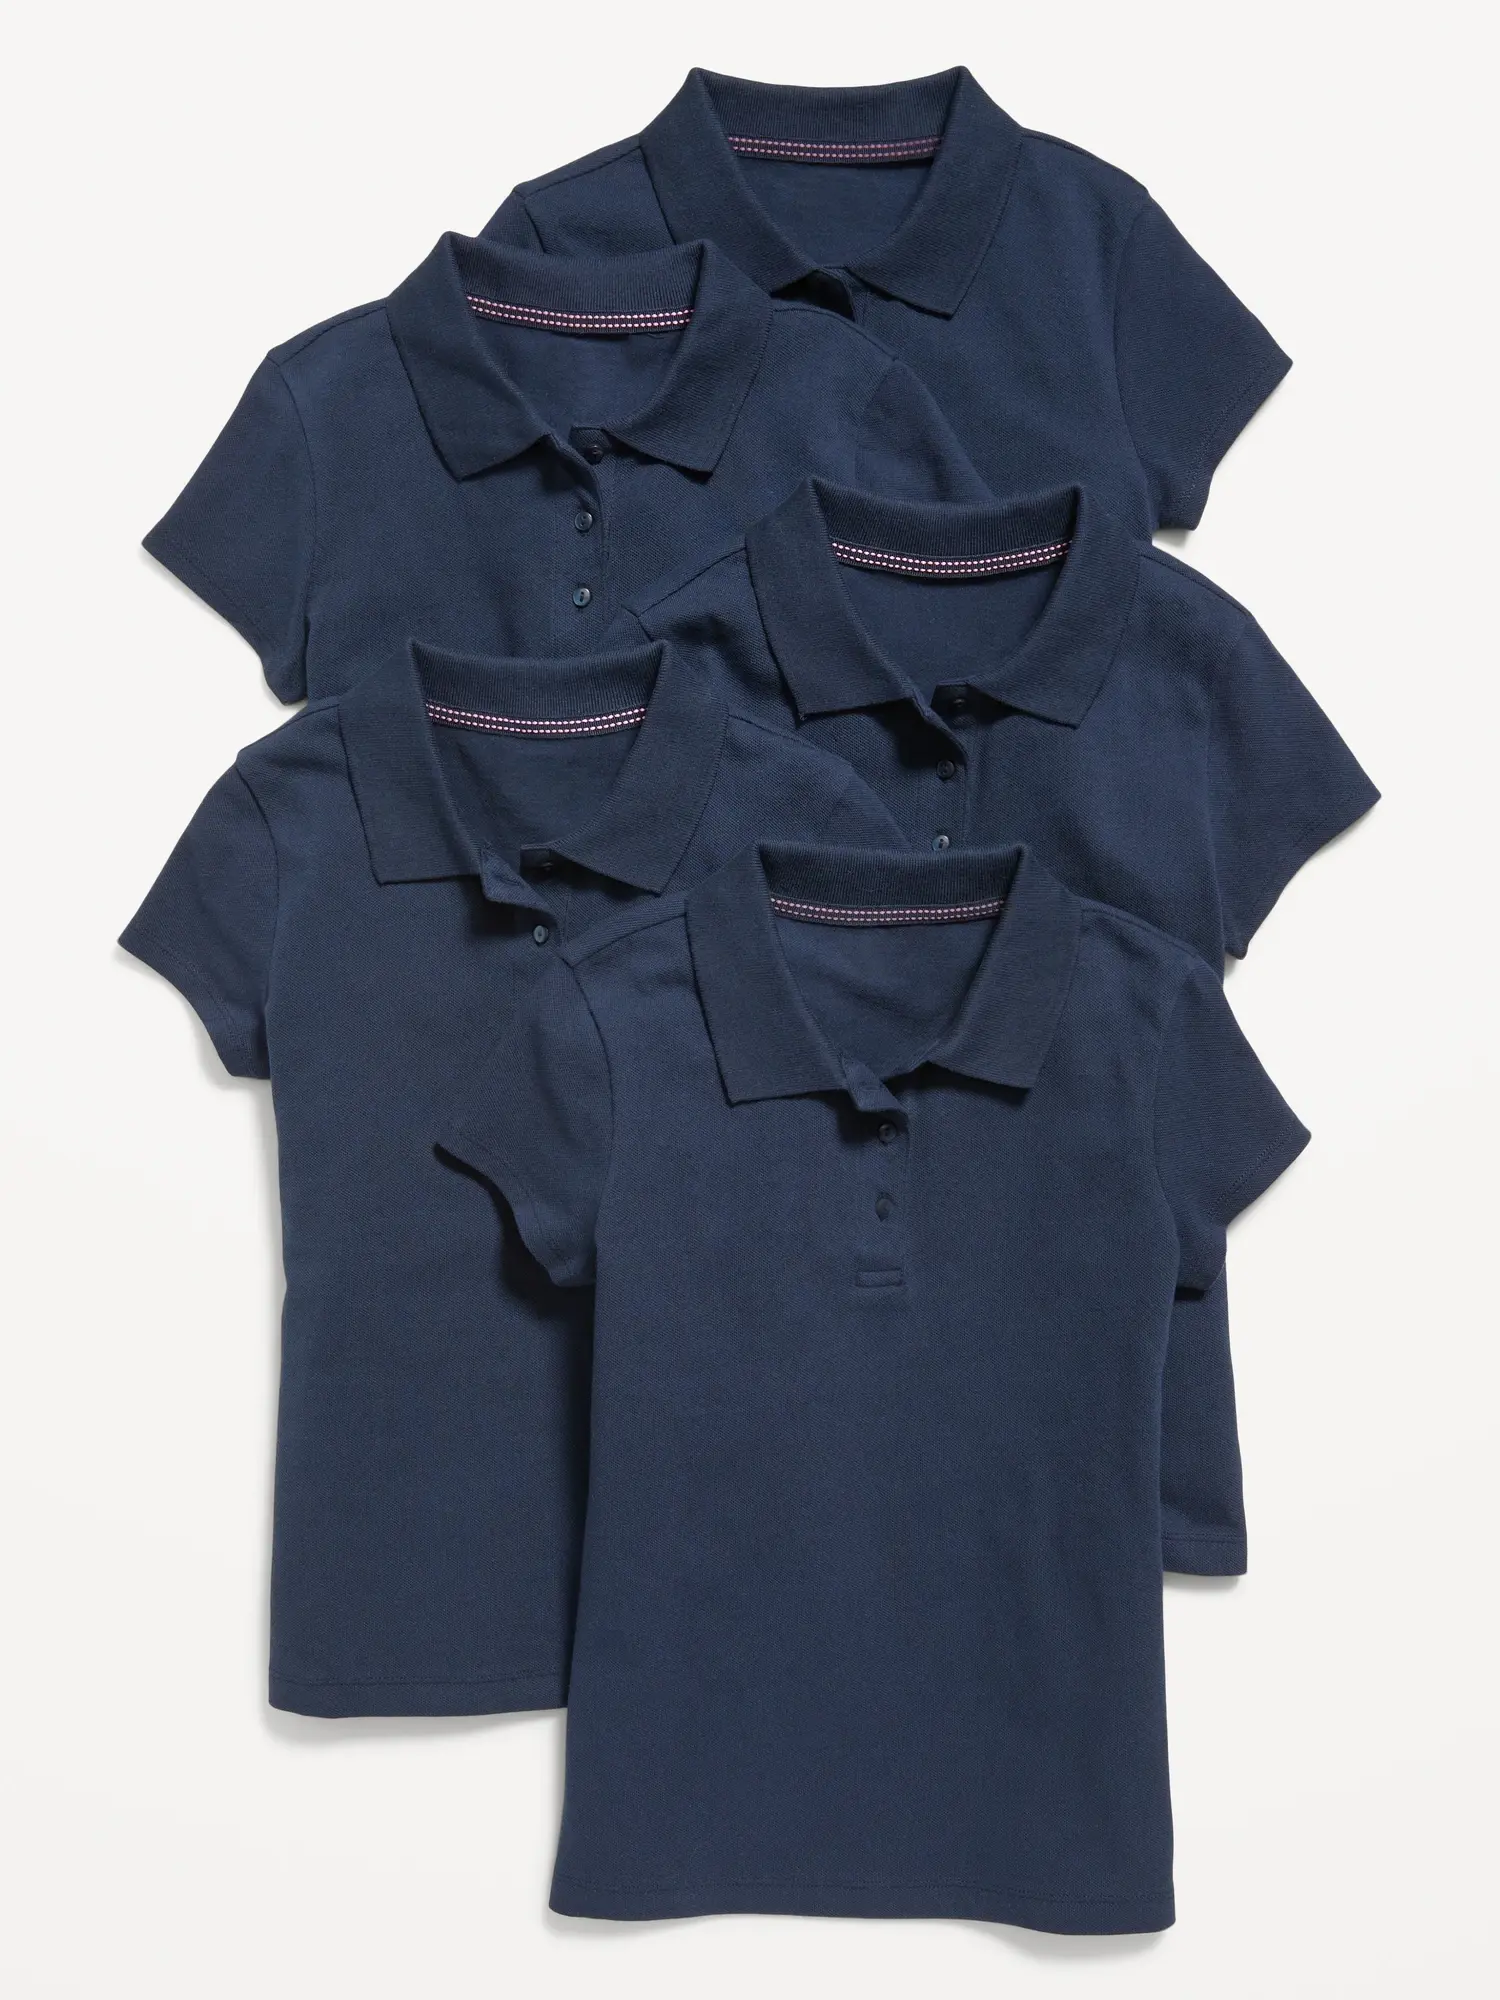 Old Navy Uniform Pique Polo Shirt 5-Pack for Girls blue. 1